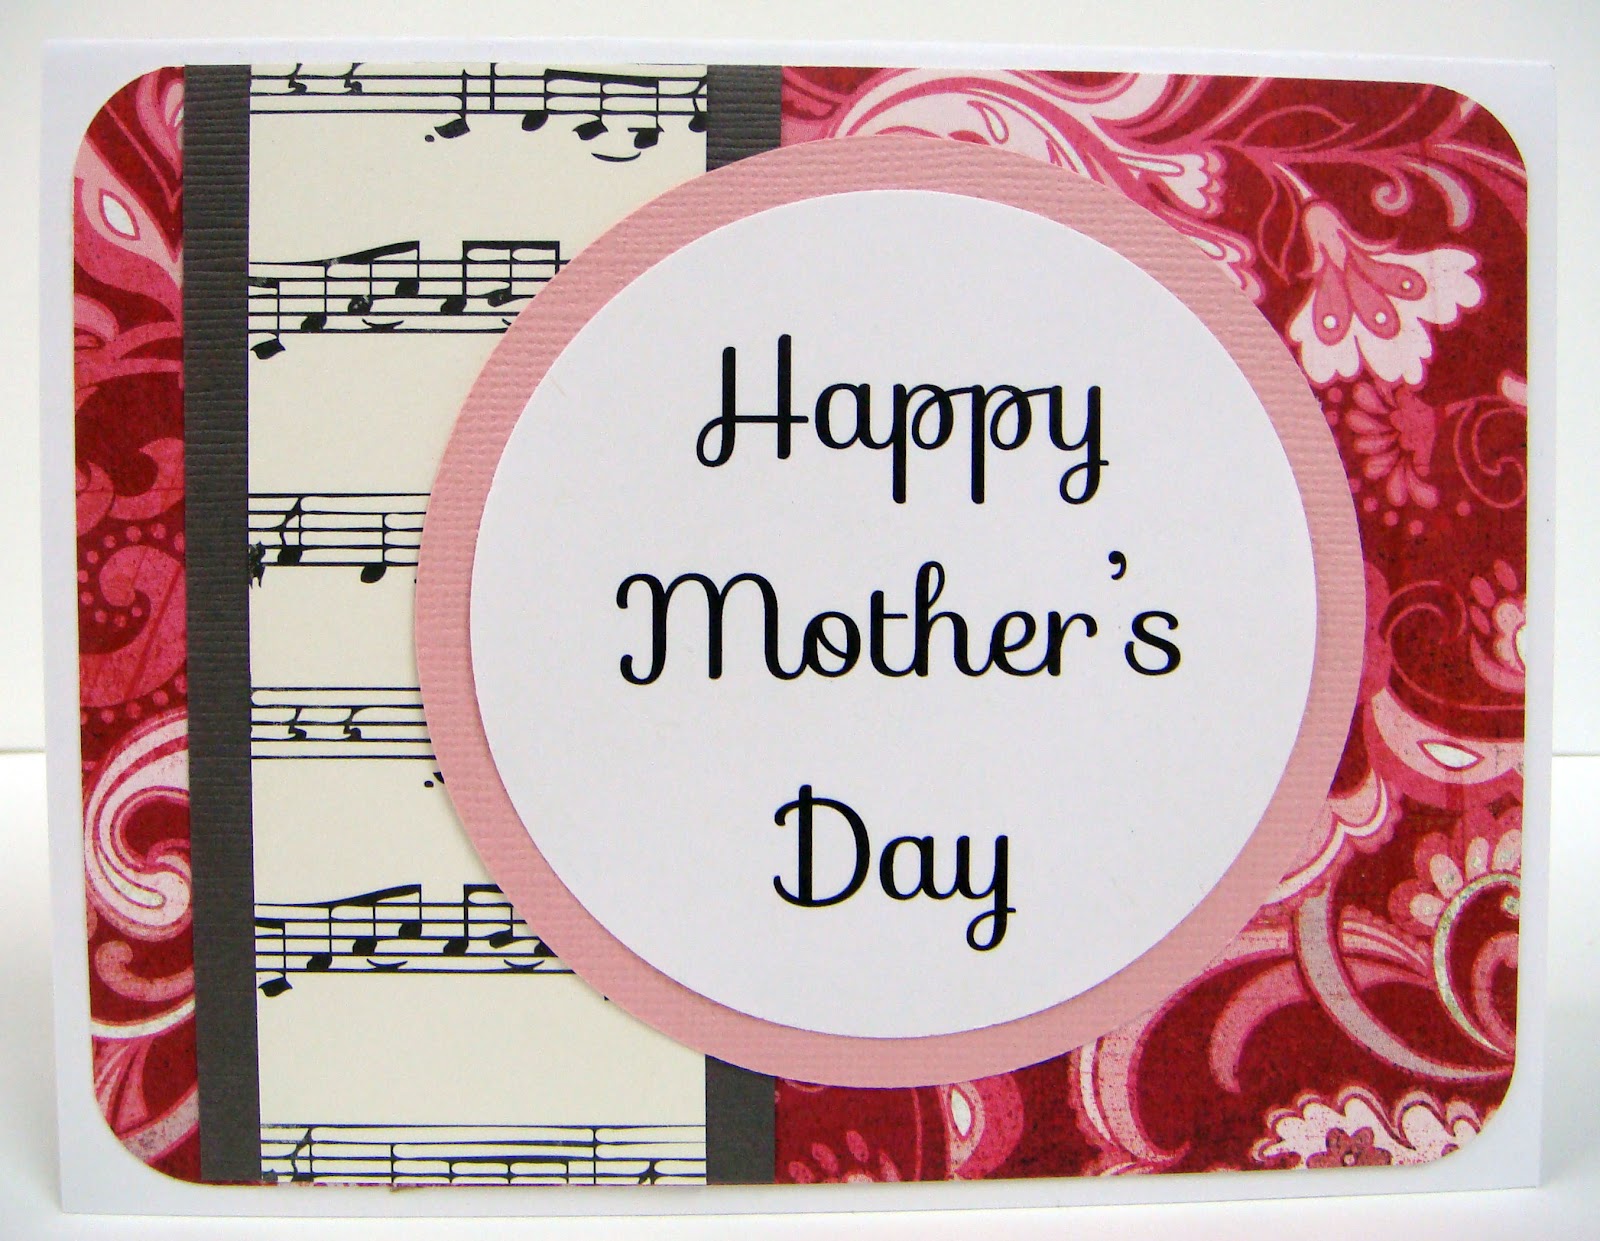 Happy Mother's Day HD Images, Wallpapers Free Download